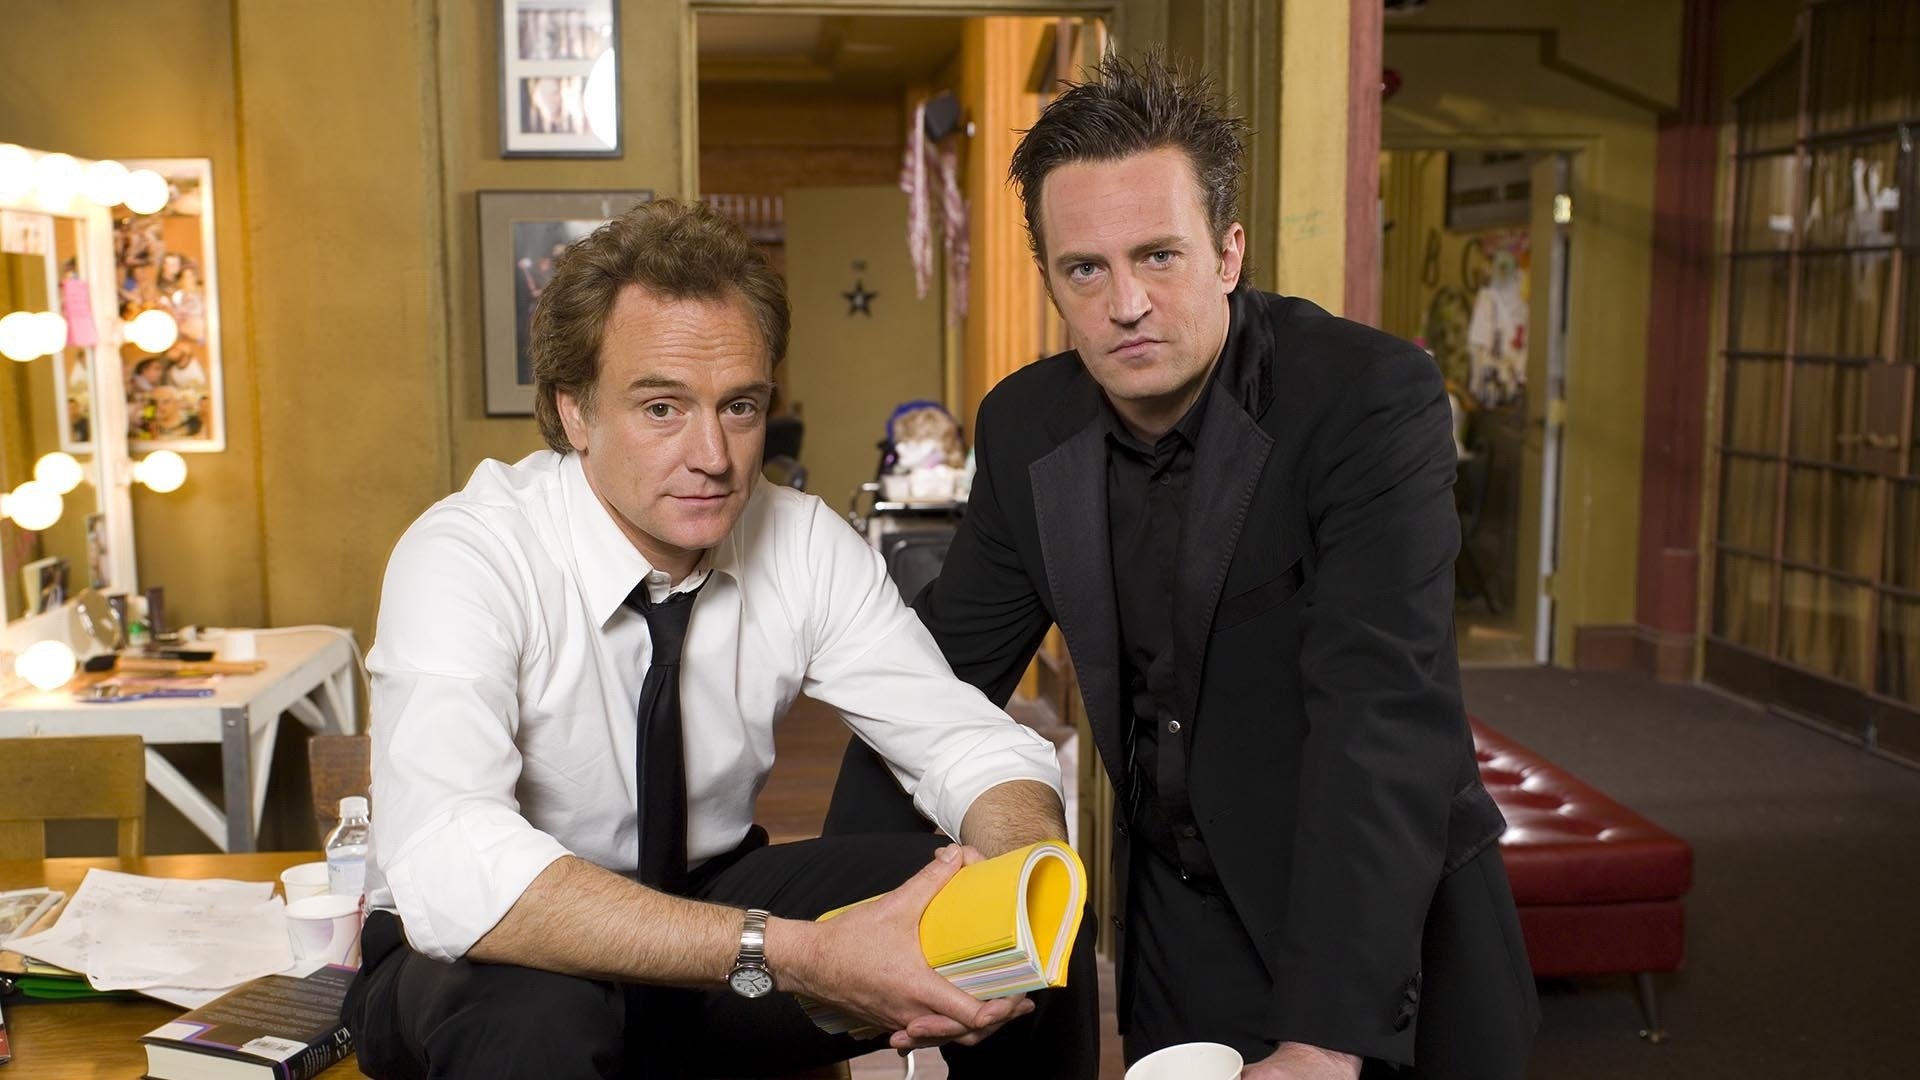 Studio 60 on the Sunset Strip: A 2006 NBC ensemble show about life behind the scenes, A fictional failing sketch comedy show, Matthew Perry. 1920x1080 Full HD Wallpaper.